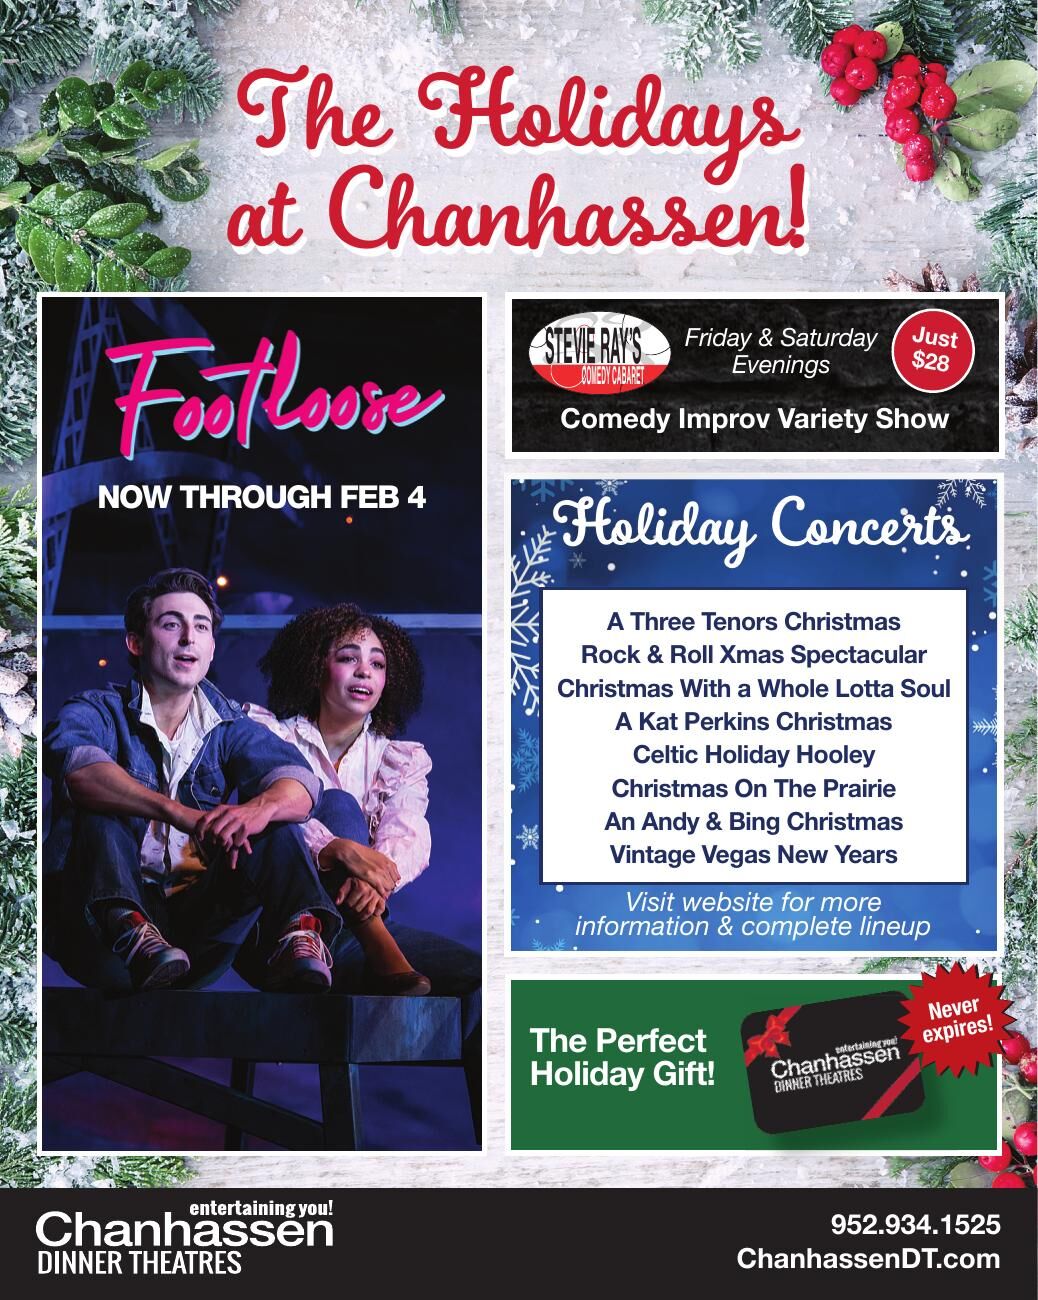 The Holidays at Chanhassen!